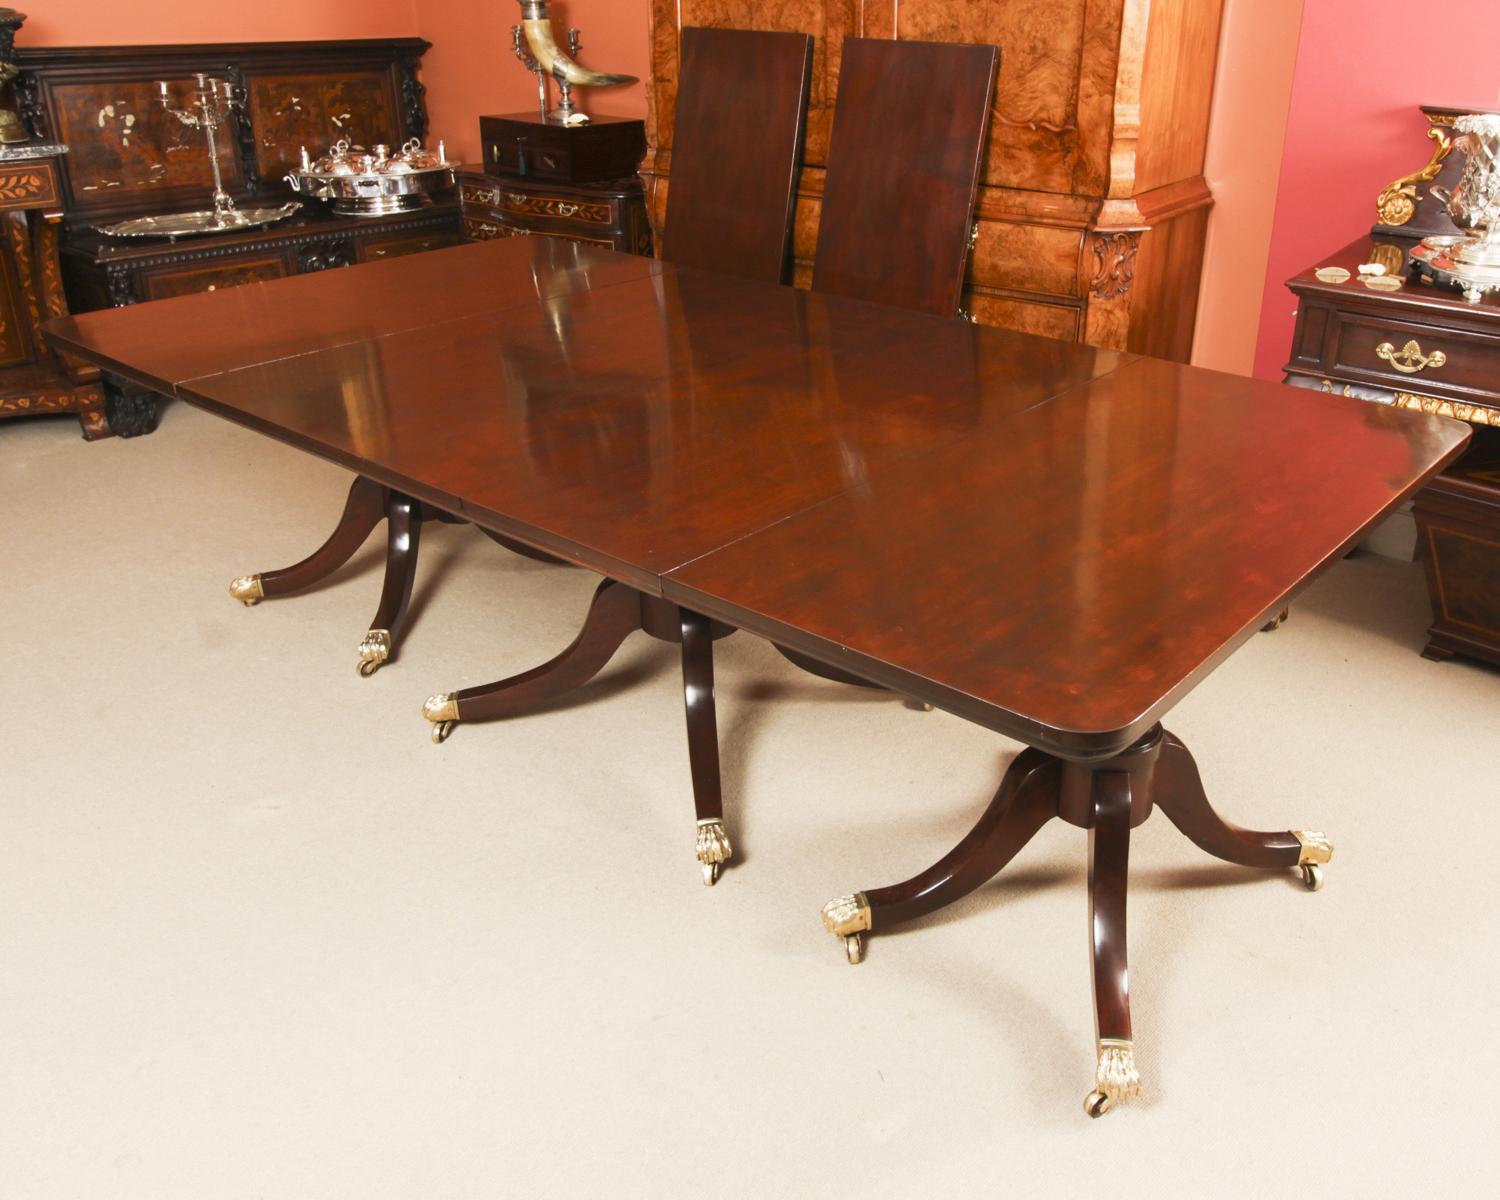 Mahogany Antique George III Regency Dining Table with 12 Regency Dining Chairs 19th C